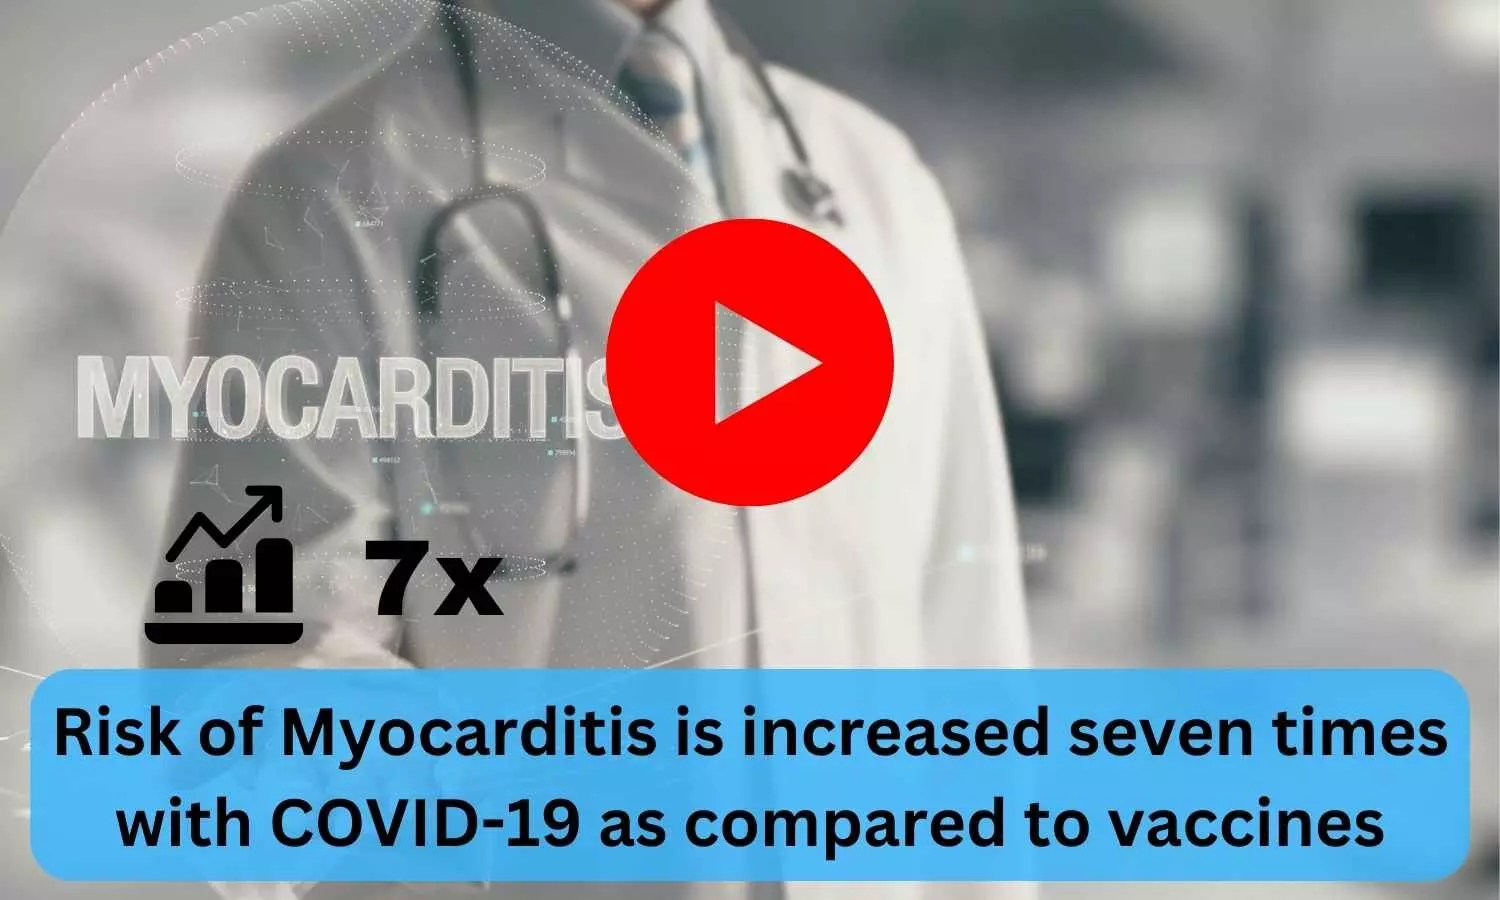 Risk of Myocarditis is increased seven times with COVID-19 as compared to vaccines